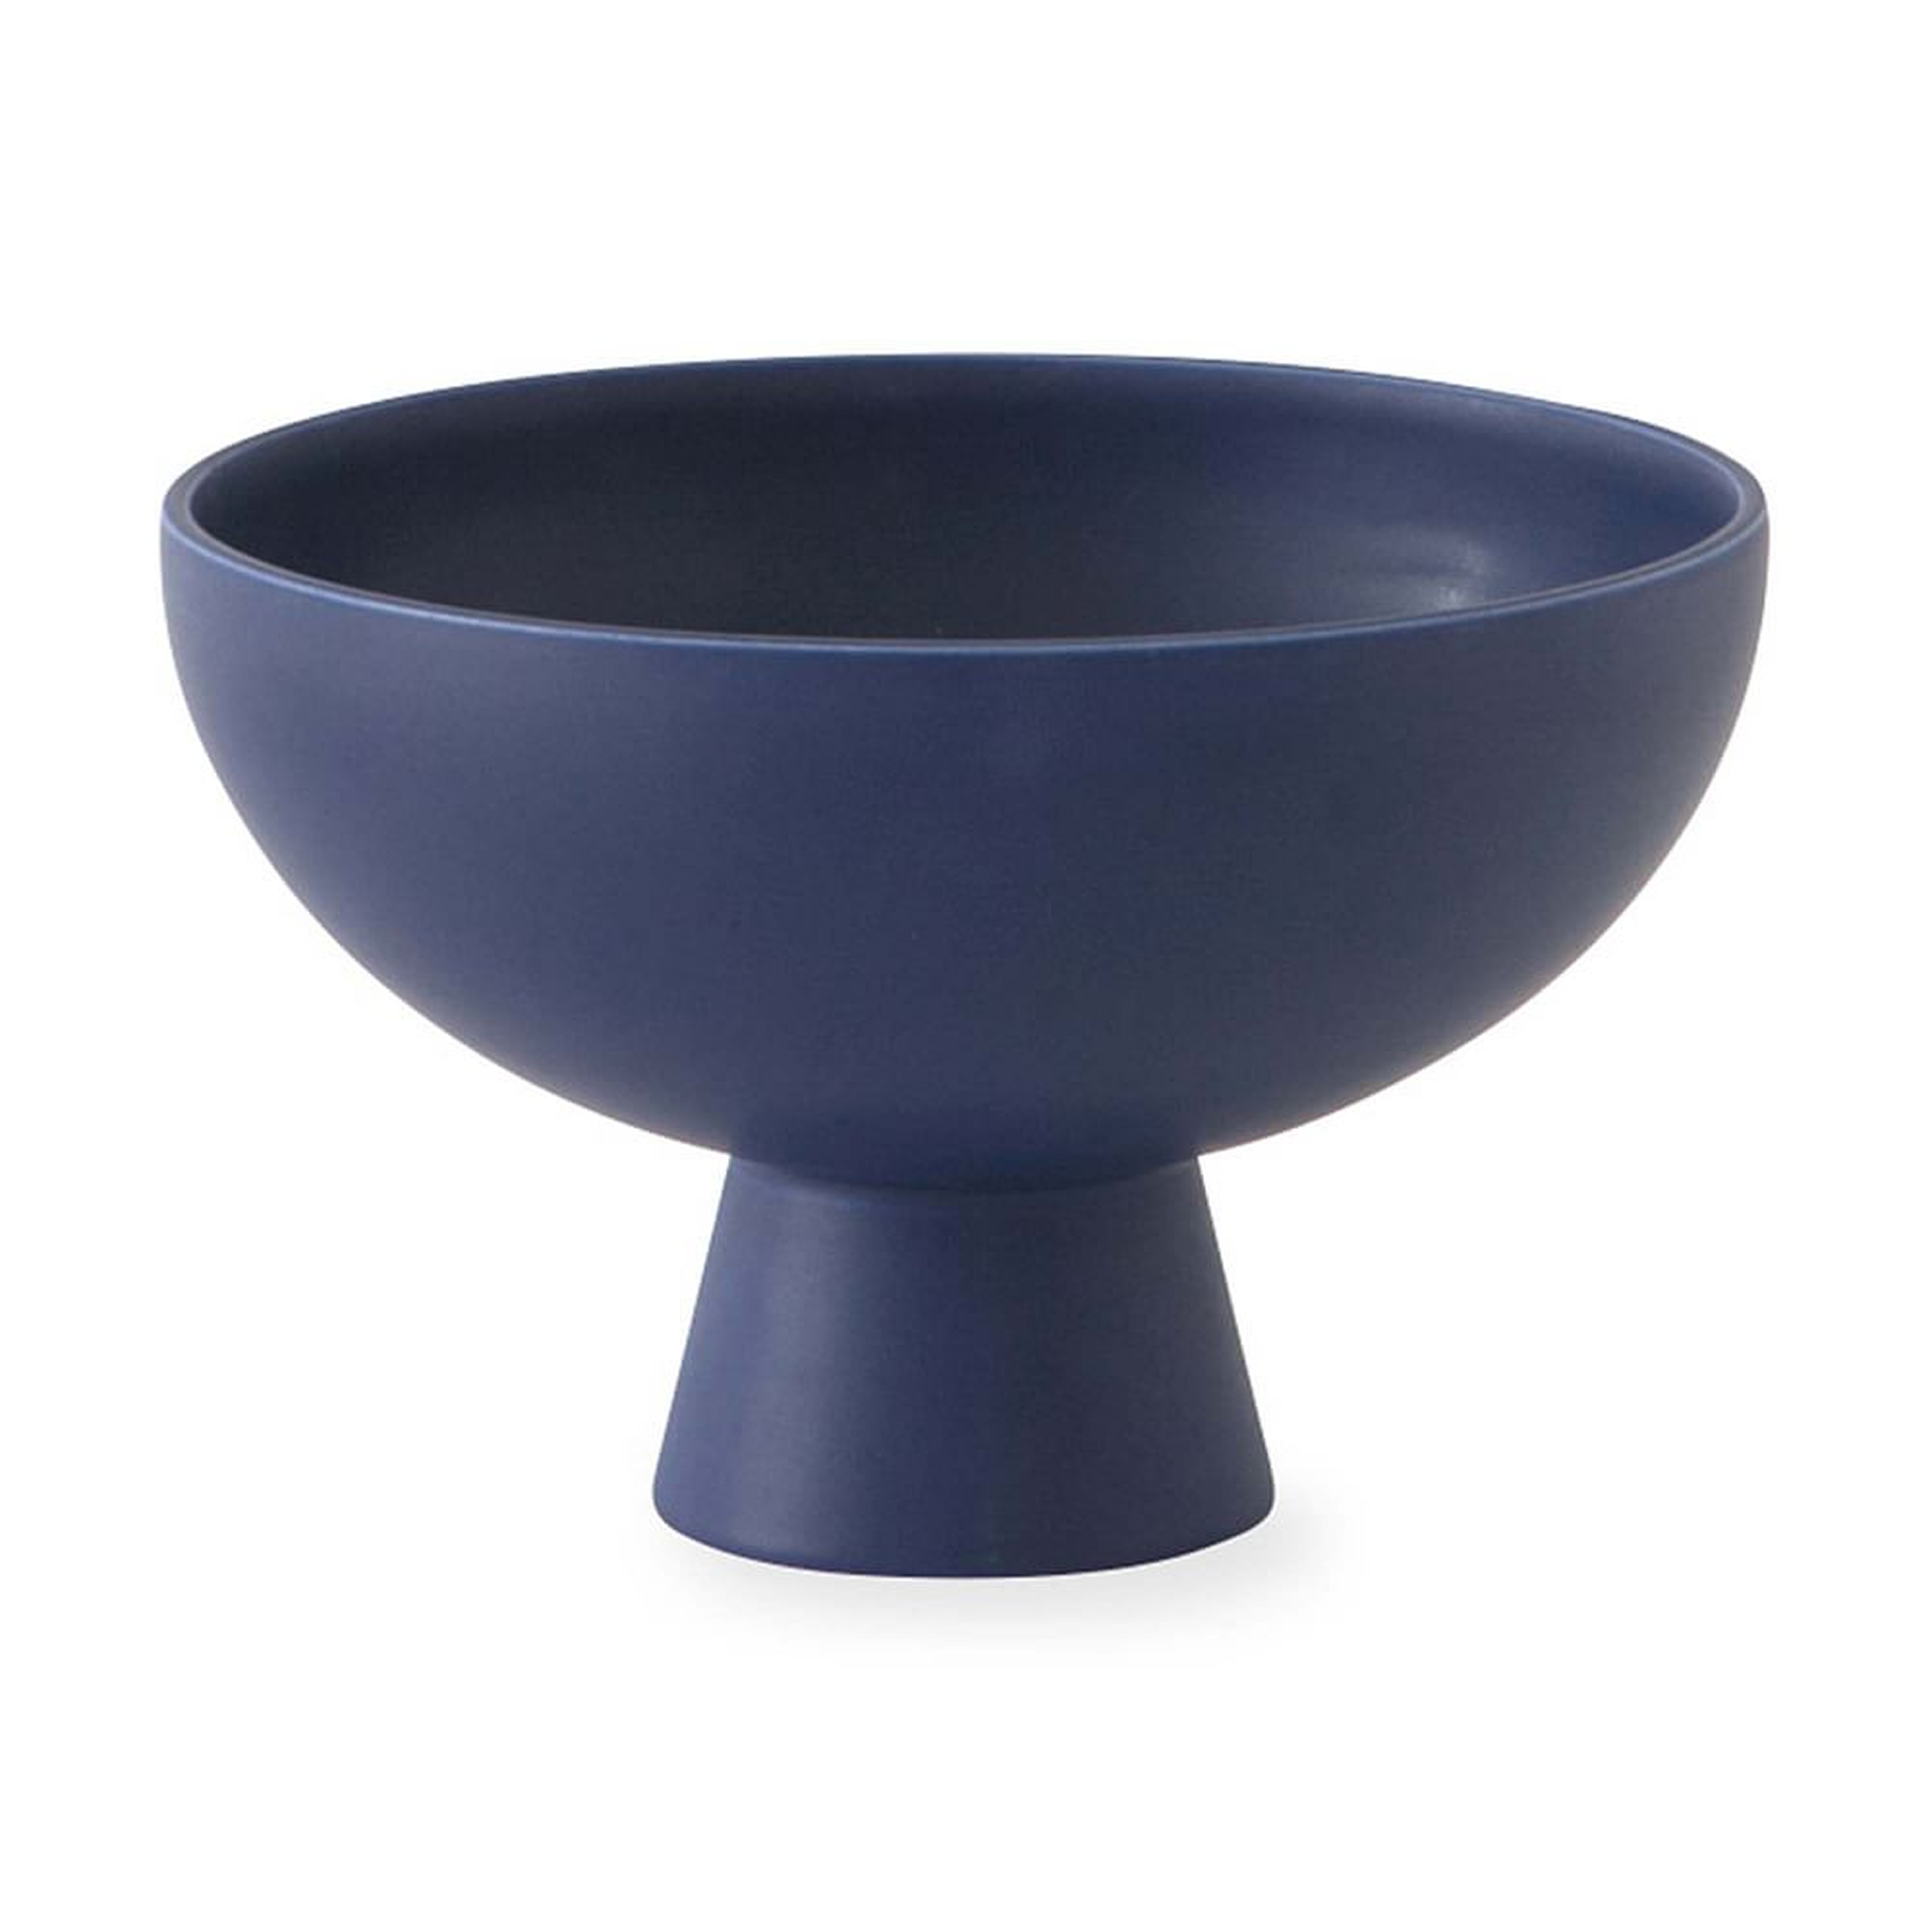 MoMA Collection Raawii Strom Bowl Small, Ceramic, Blue - West Elm